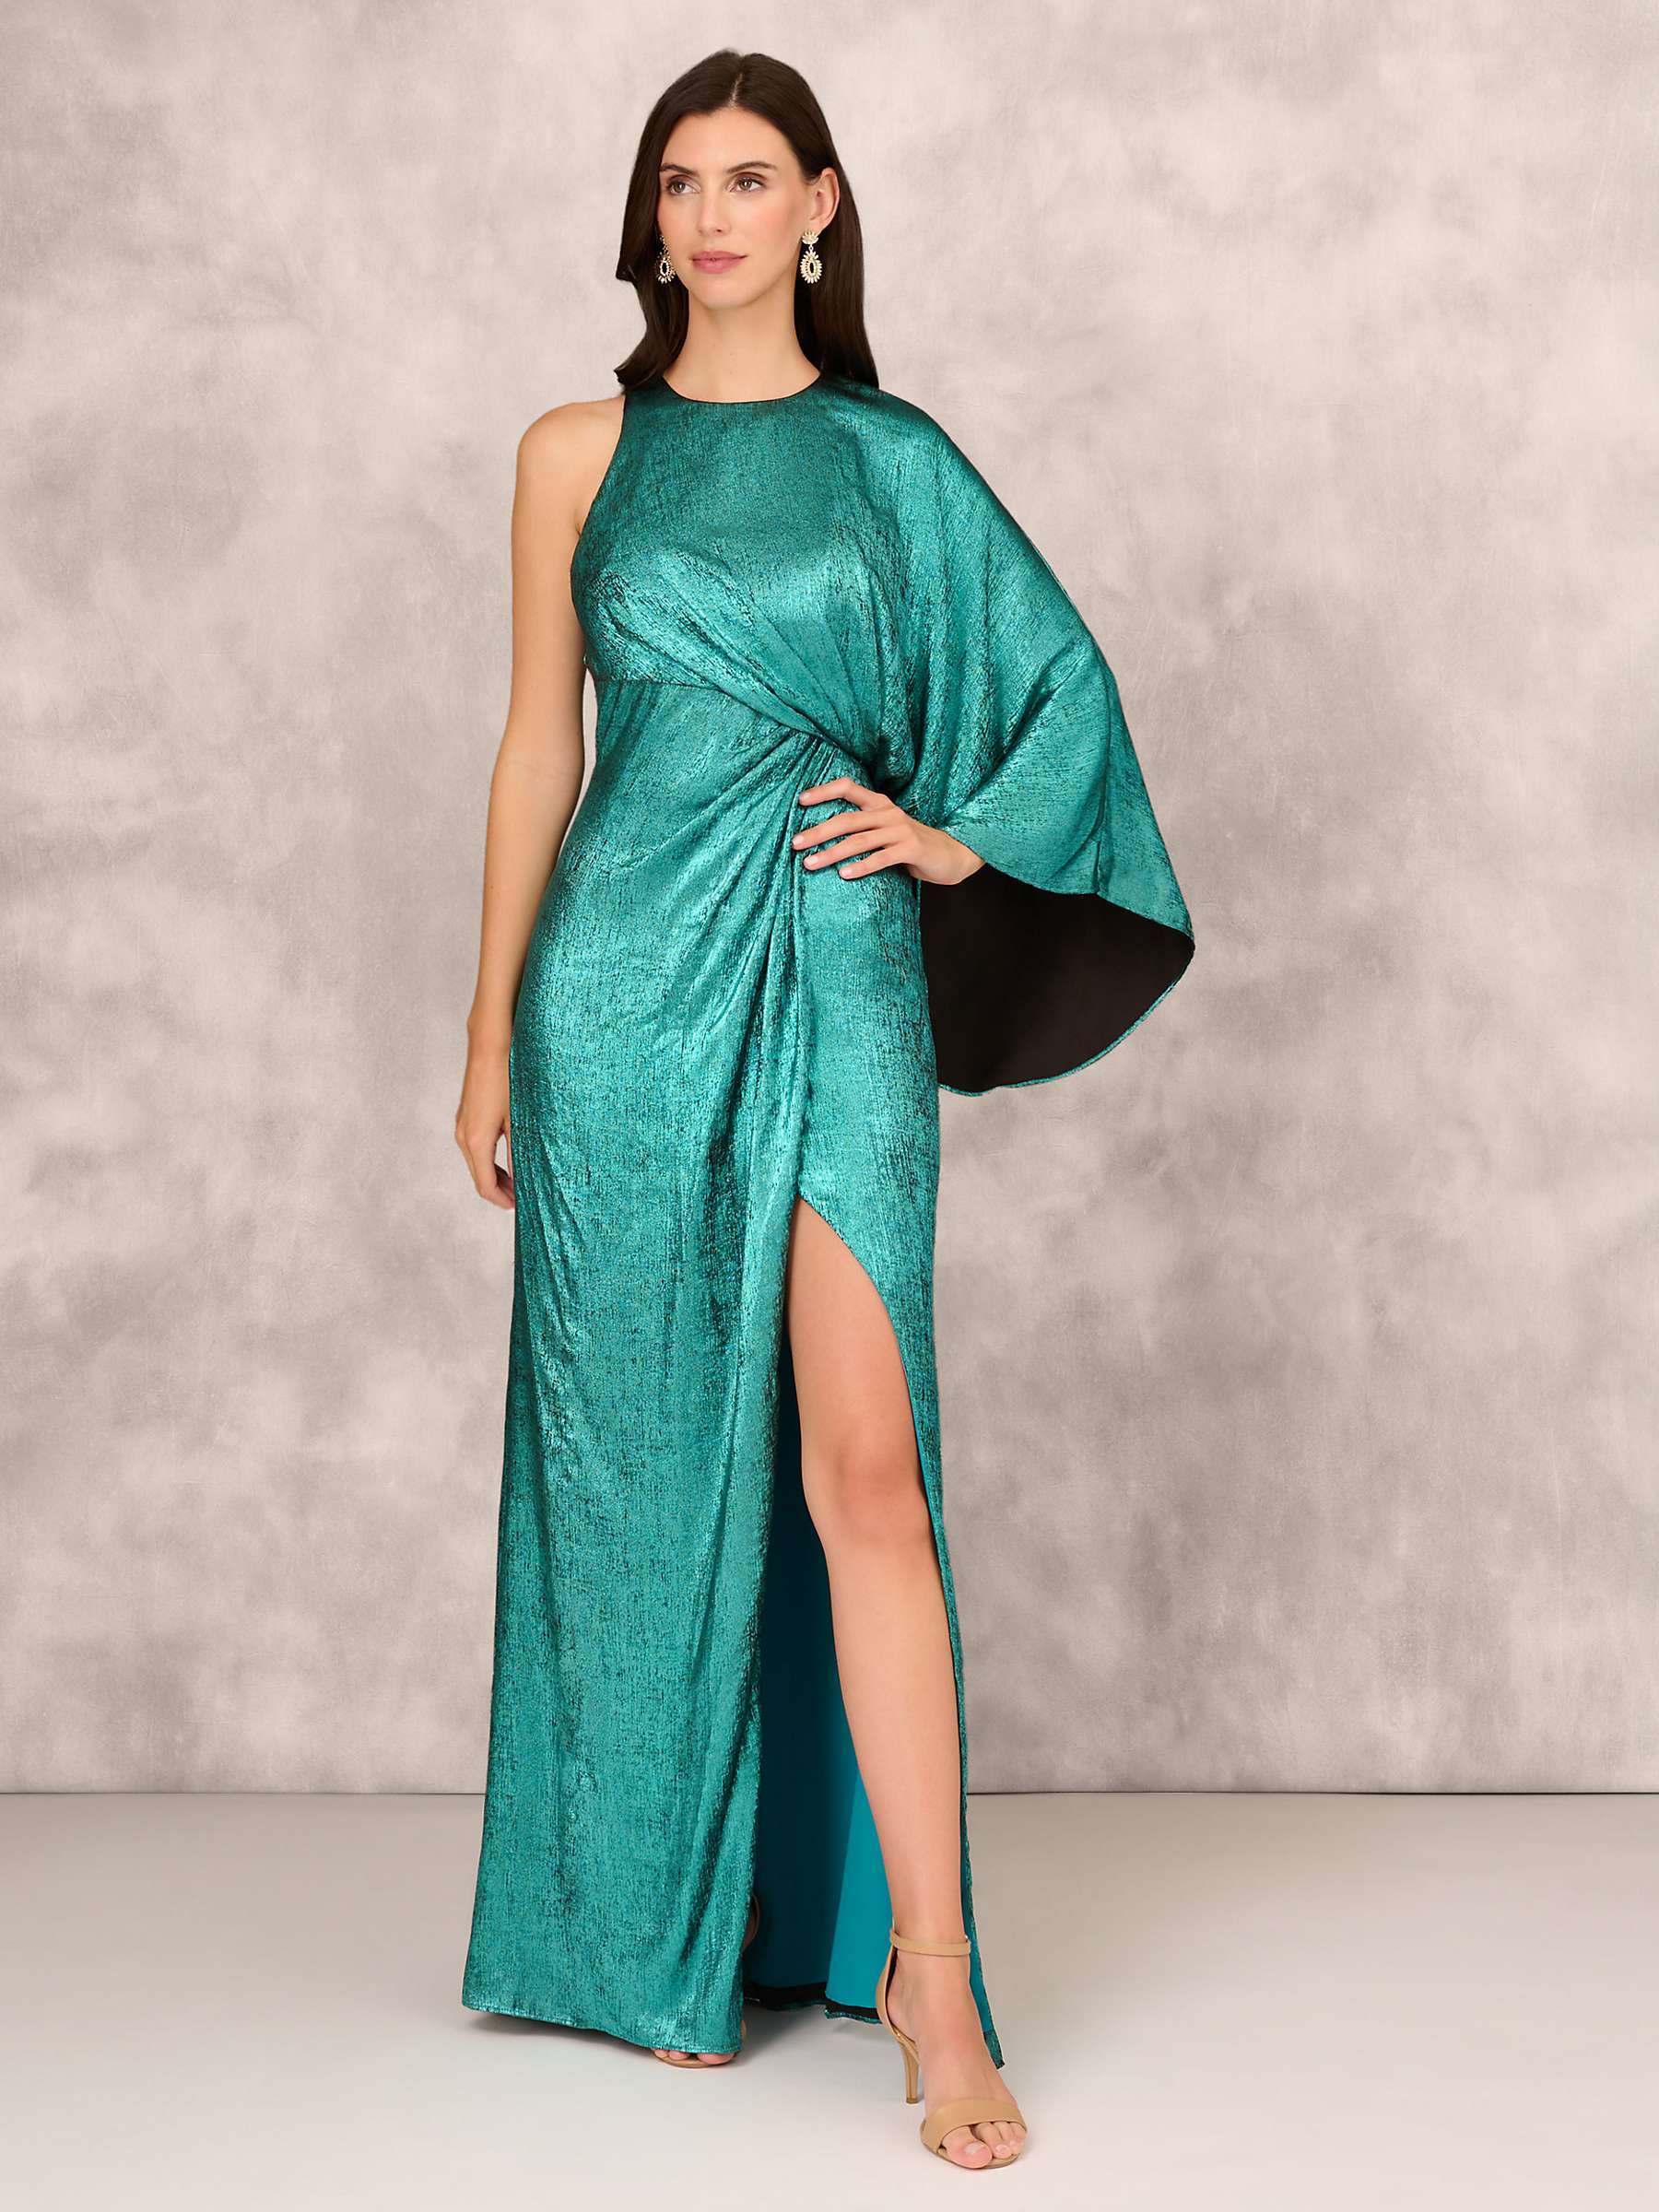 Buy Adian Mattox by Adrianna Papell Foil Chiffon Gown, Jade Online at johnlewis.com